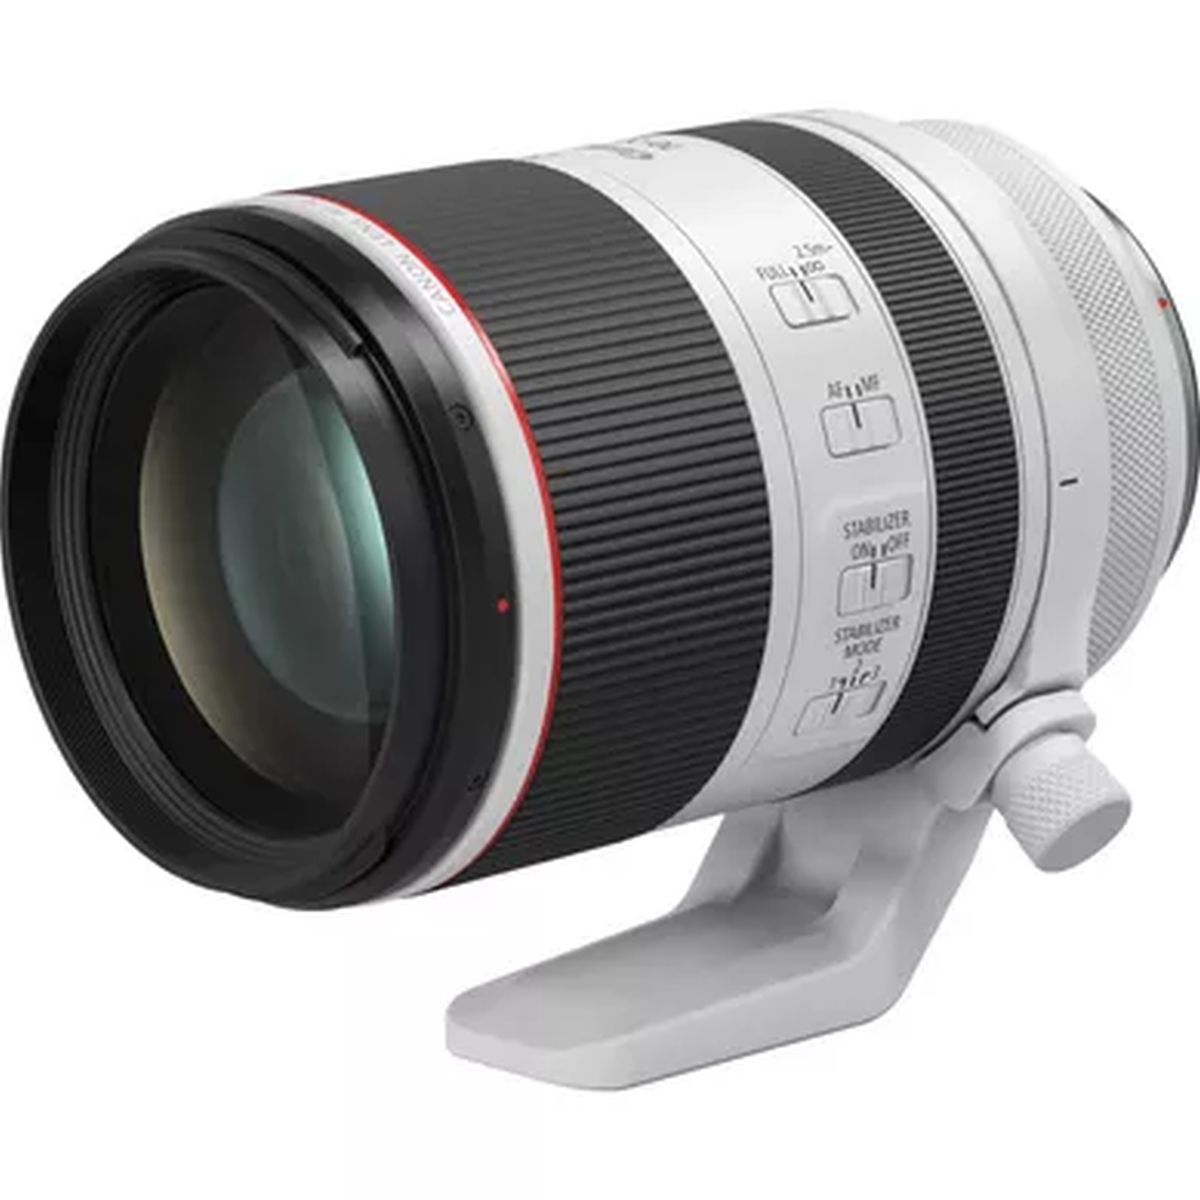 Canon RF 70-200 mm 1:2,8 L IS USM